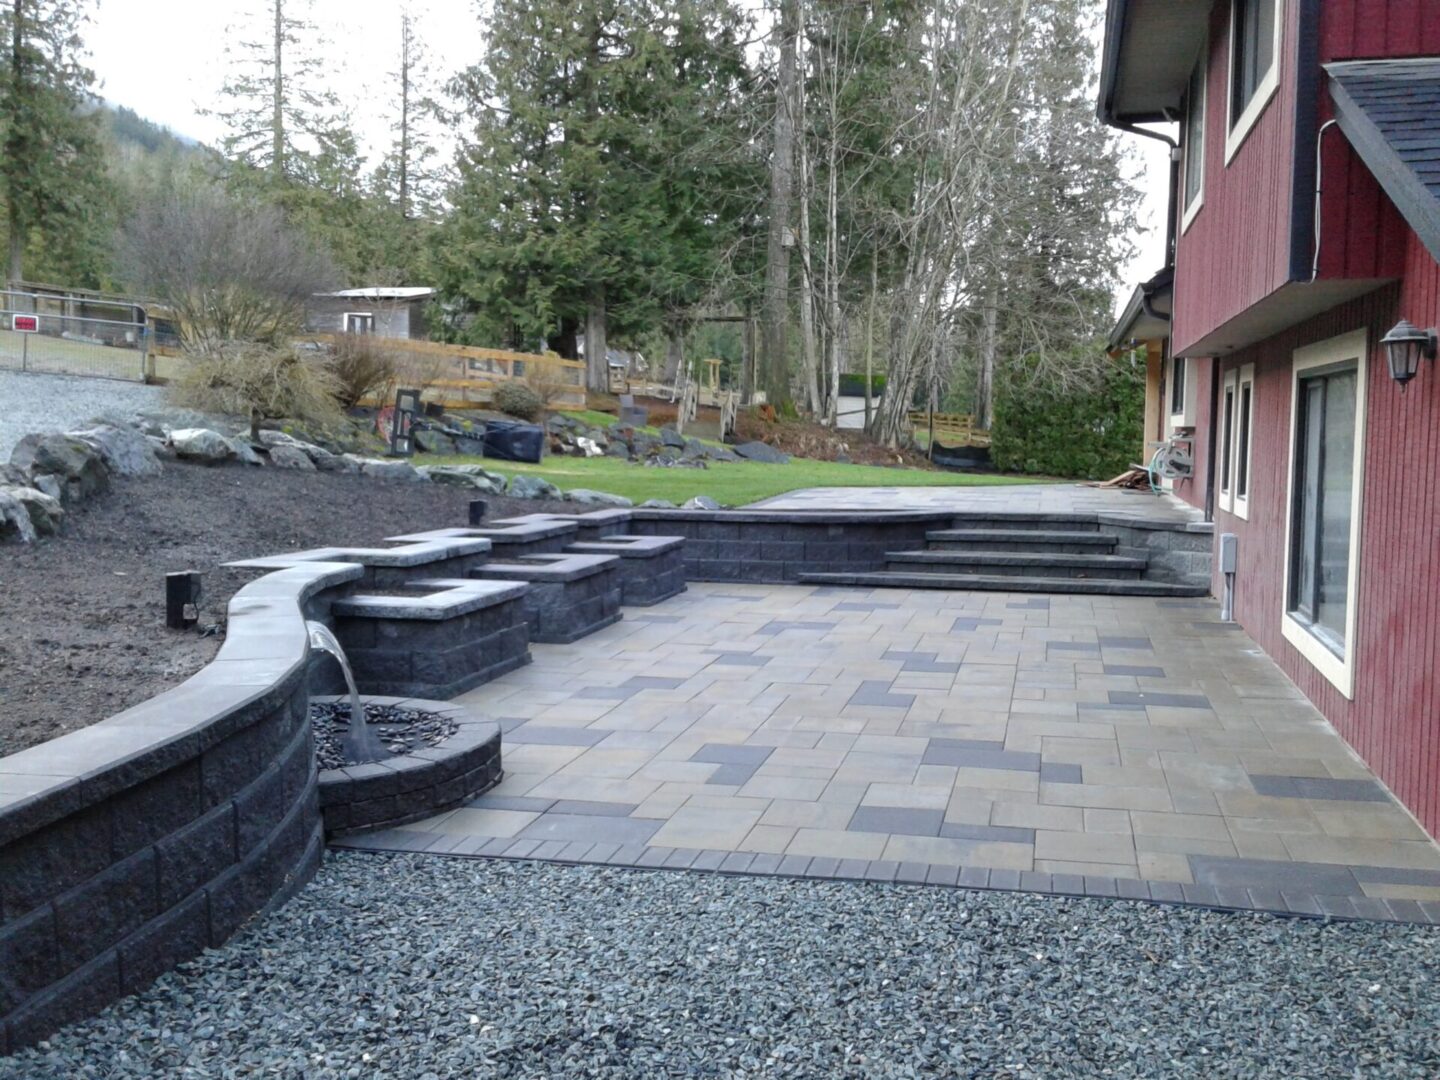 Paved patio with curved stone walls near a red house, overlooking a landscaped garden with trees.